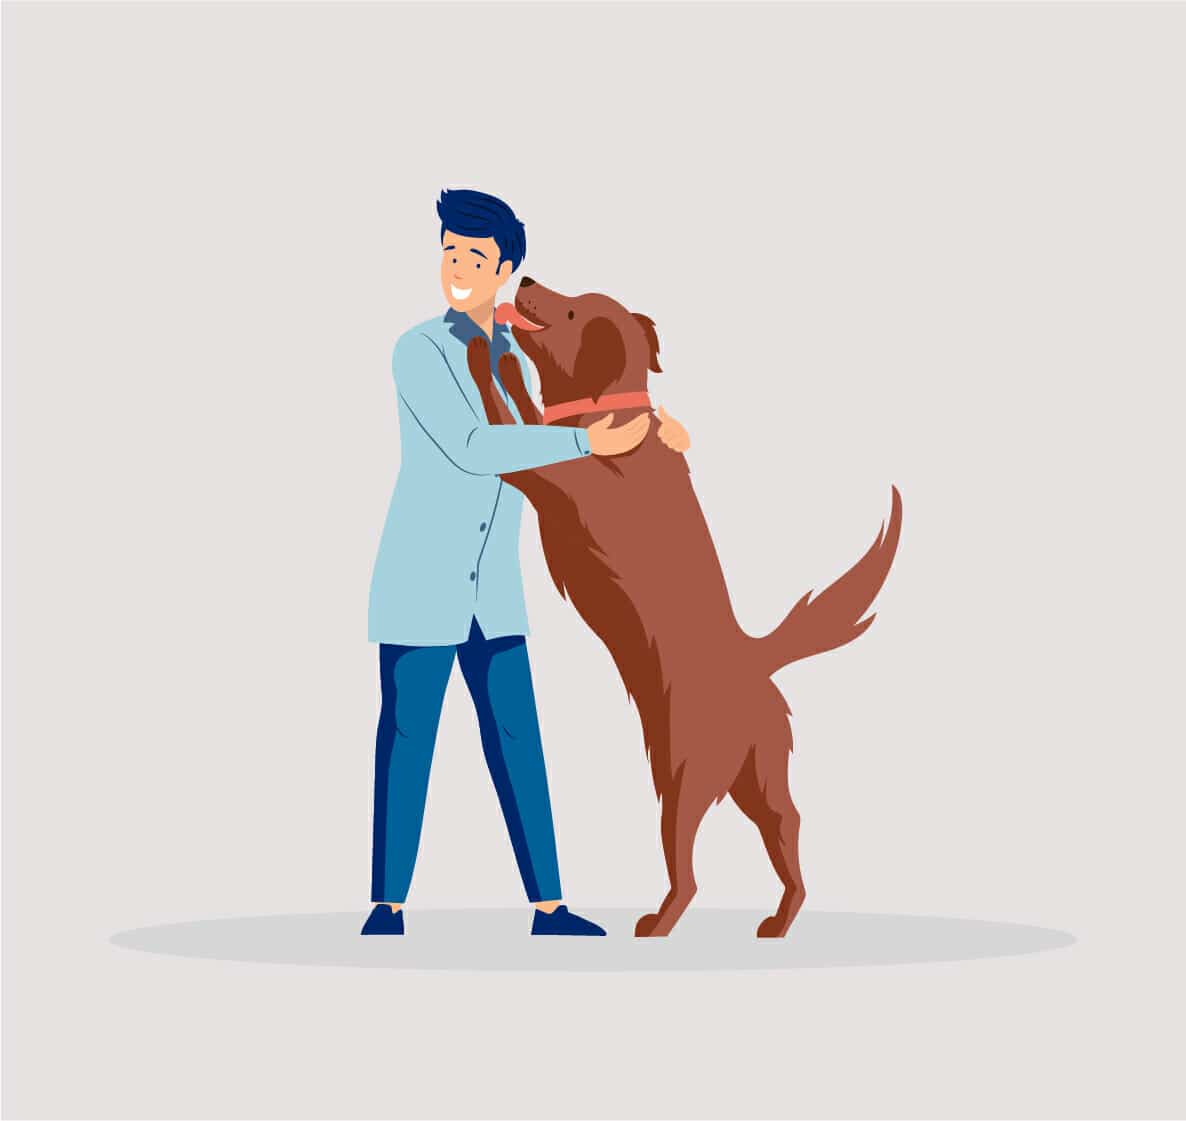 Read more about the article How To Get An Emotional Support Animal As Part Of Your Healing Process: 5 Essential Things to Consider